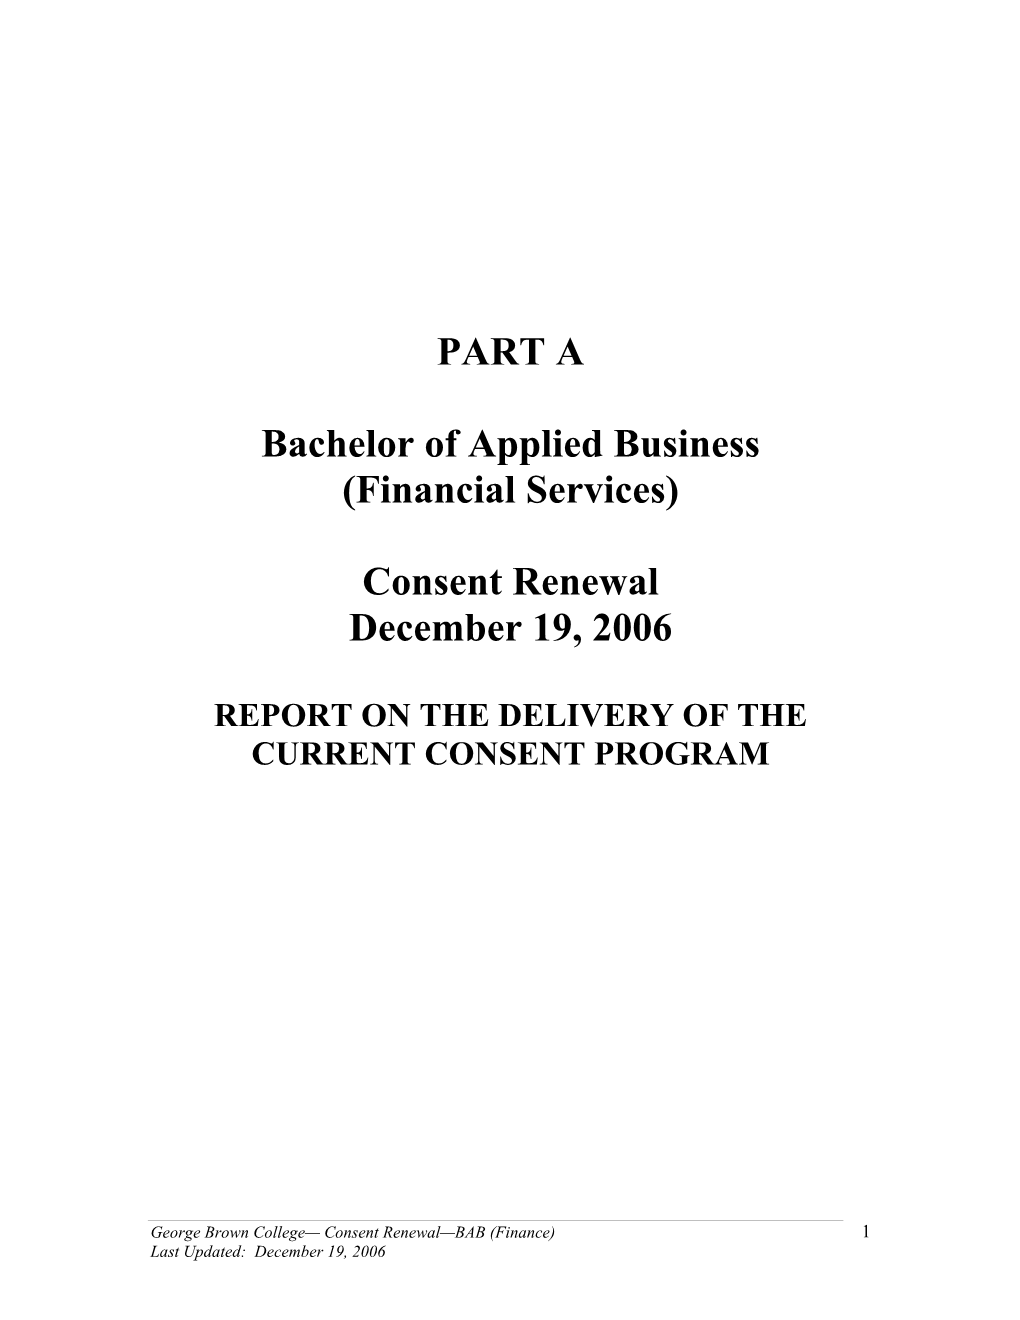 (Financial Services) Consent Renewal December 19, 2006